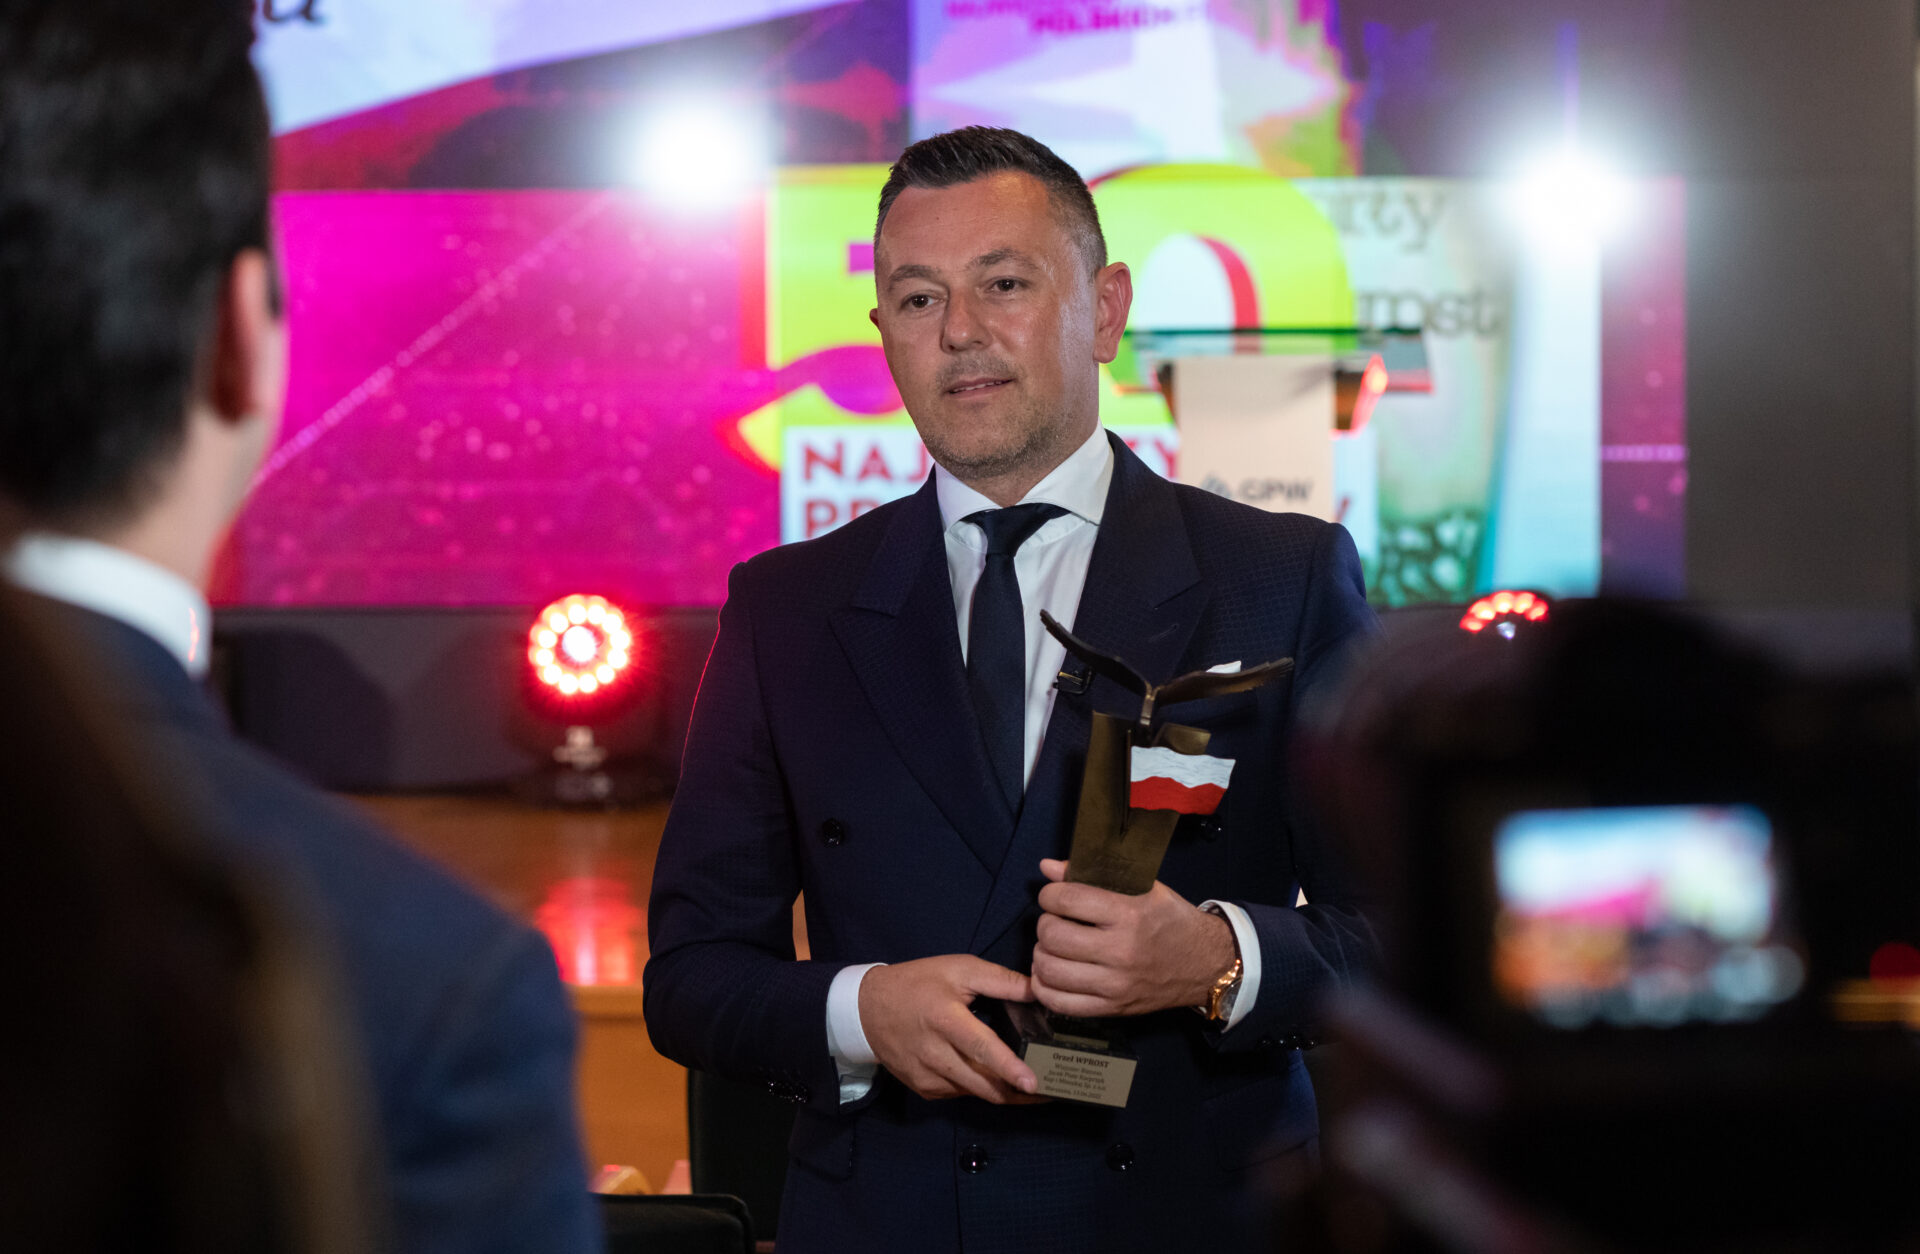 Jacek Piotr Kacprzyk shortly after collecting the 2022 Wprost Eagle award